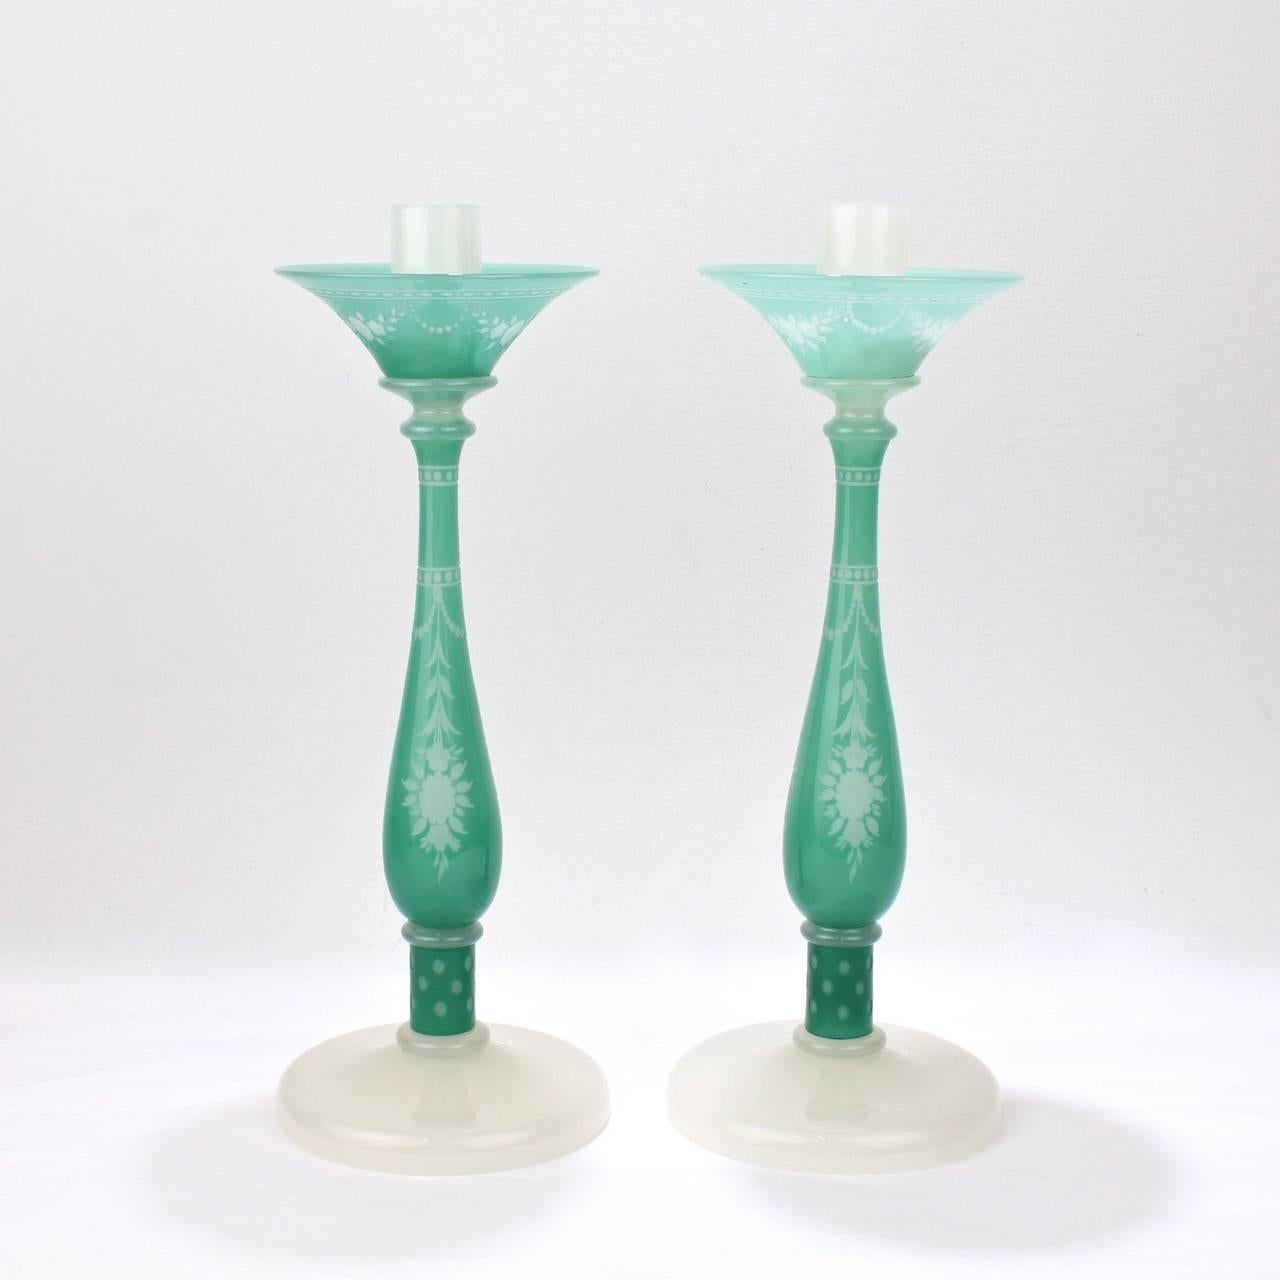 A very fine, large pair of Steuben candlesticks in the rare York pattern.

Alabaster white and jade green glass with wheel-cut decoration,

circa 1930s.

Bases each bear a fleur-de-lis acid etched Steuben factory mark.

Height: ca. 14 1/2